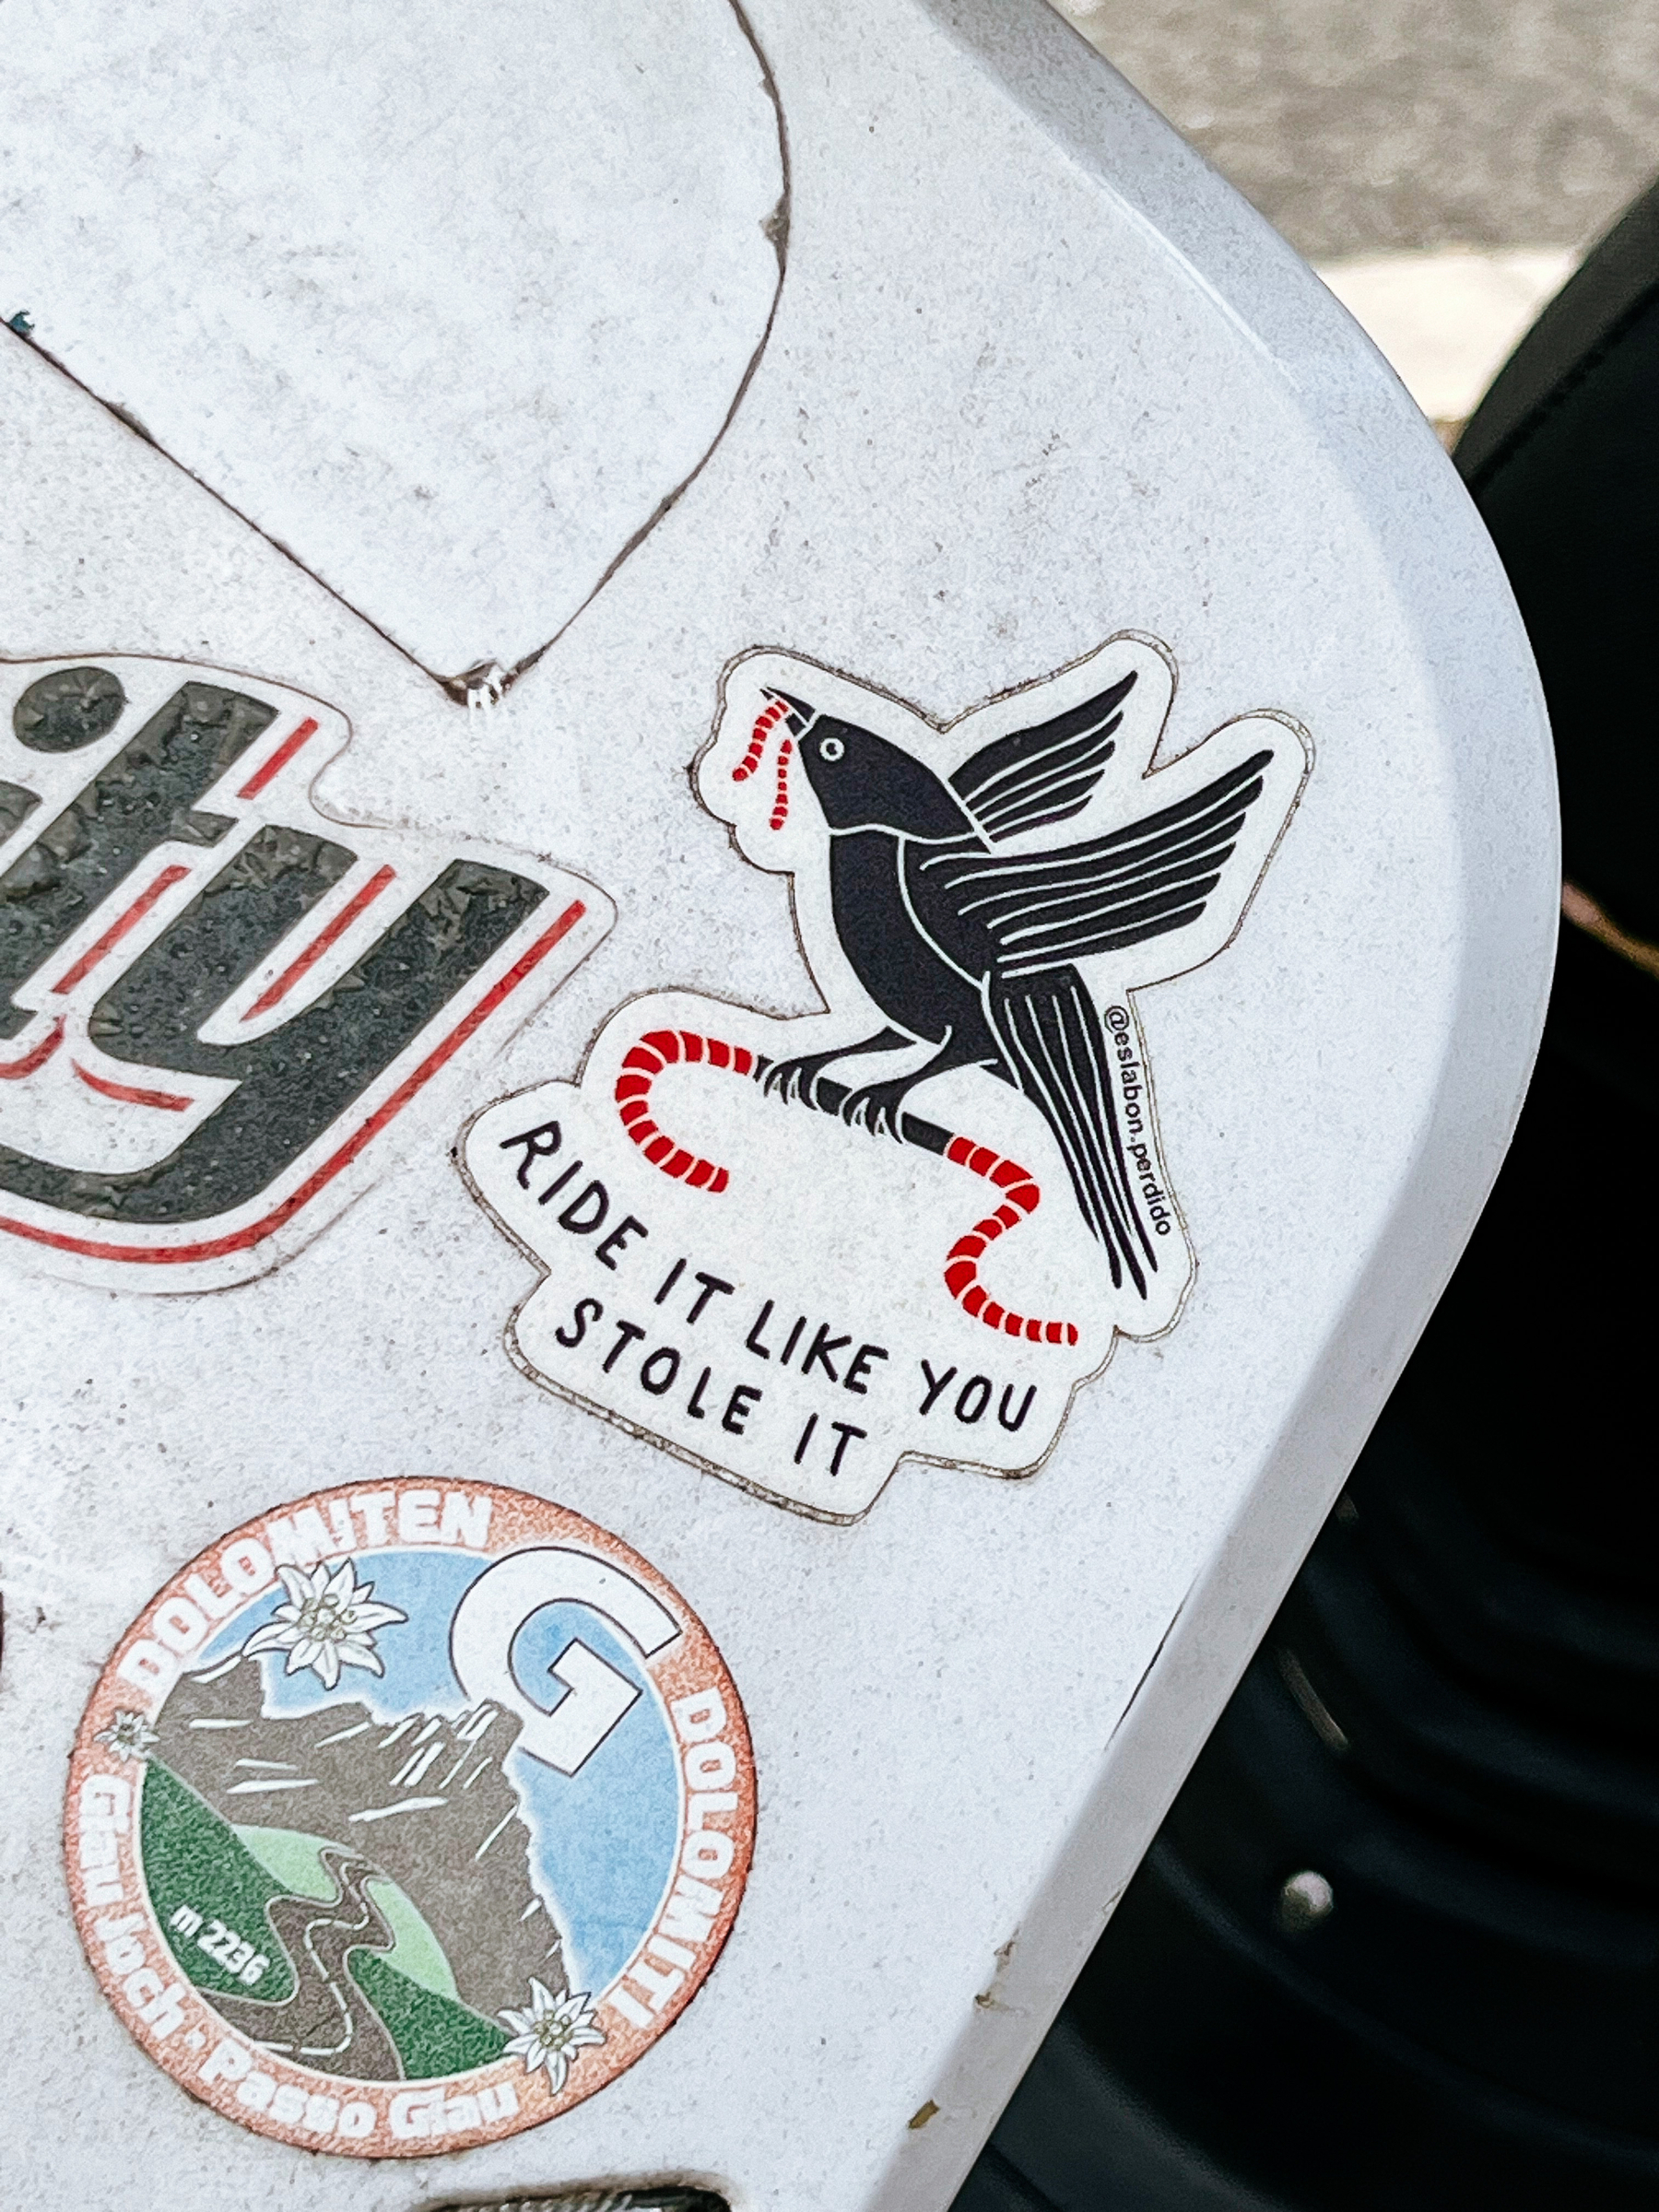 Sticker of a flying bird holding bicycle handlebars on its feet, and what looks like a worm on the beak. The words “ride it like you stole it”. 